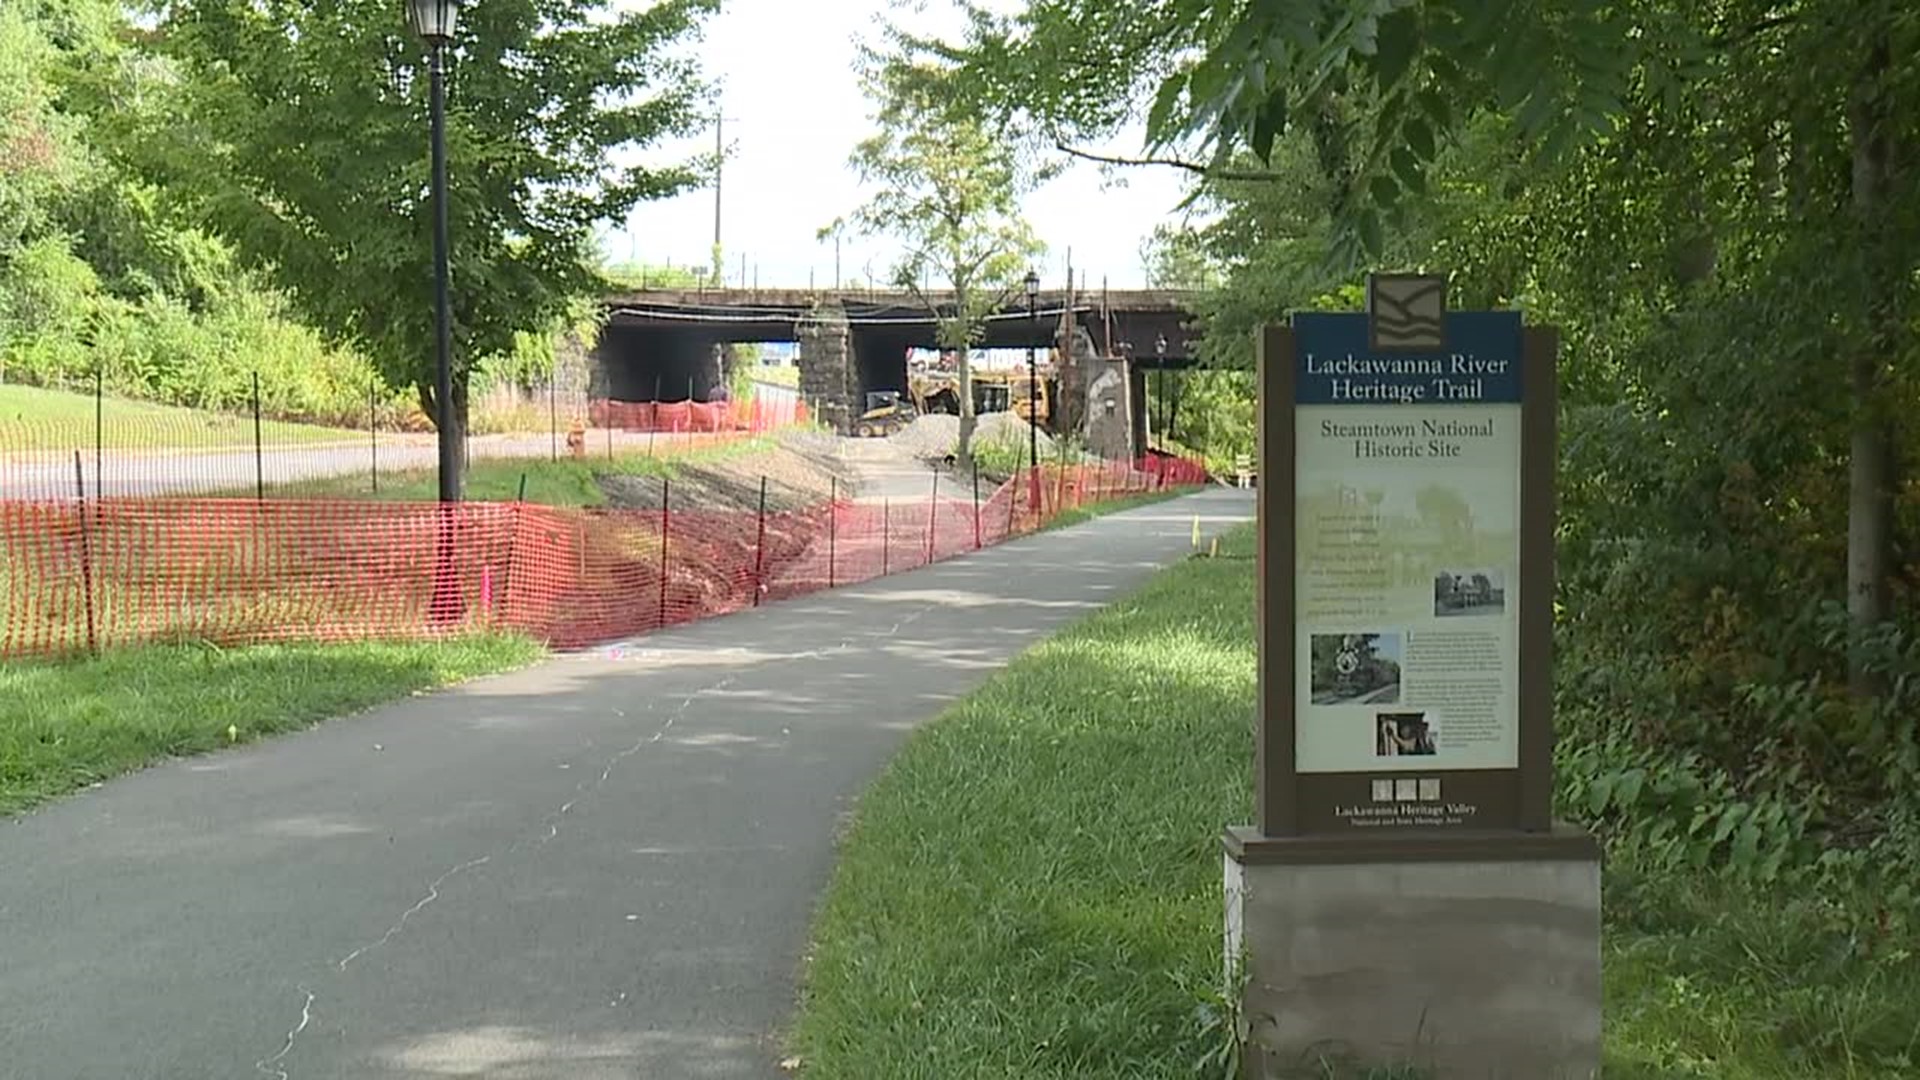 Construction has started on a new section of the Lackawanna River Heritage Trail. The goal is to make using the trail, easier, safer, and more enjoyable.